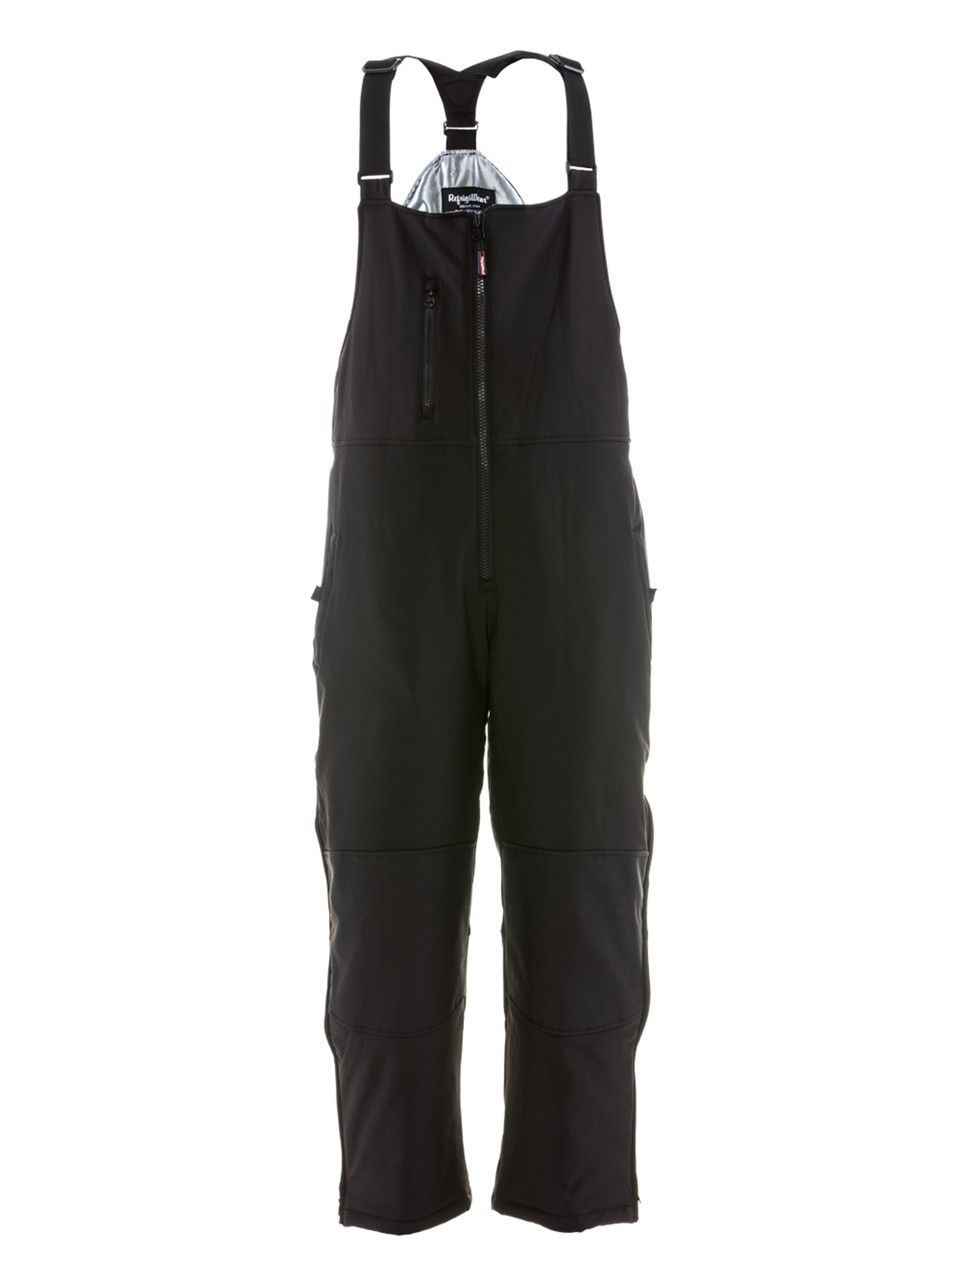 Insulated Softshell Bib Overalls (495), Rated for -20°F